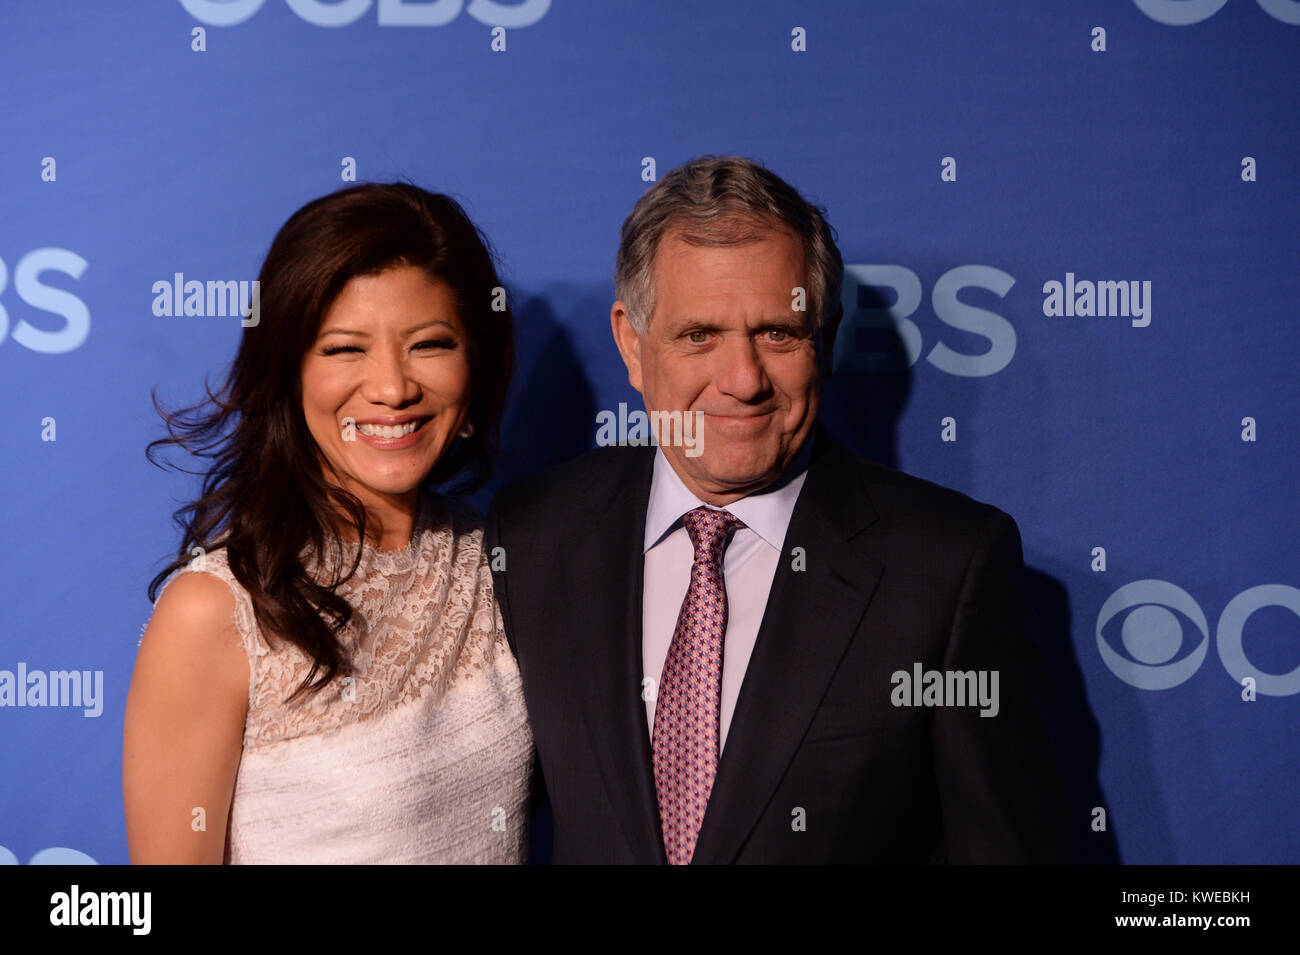 NEW YORK, NY - MAY 15:  Les Moonves Julie Chen attends the 2013 CBS Upfront at The Tent at Lincoln Center on May 15, 2013 in New York City   People:  Les Moonves Julie Chen Stock Photo